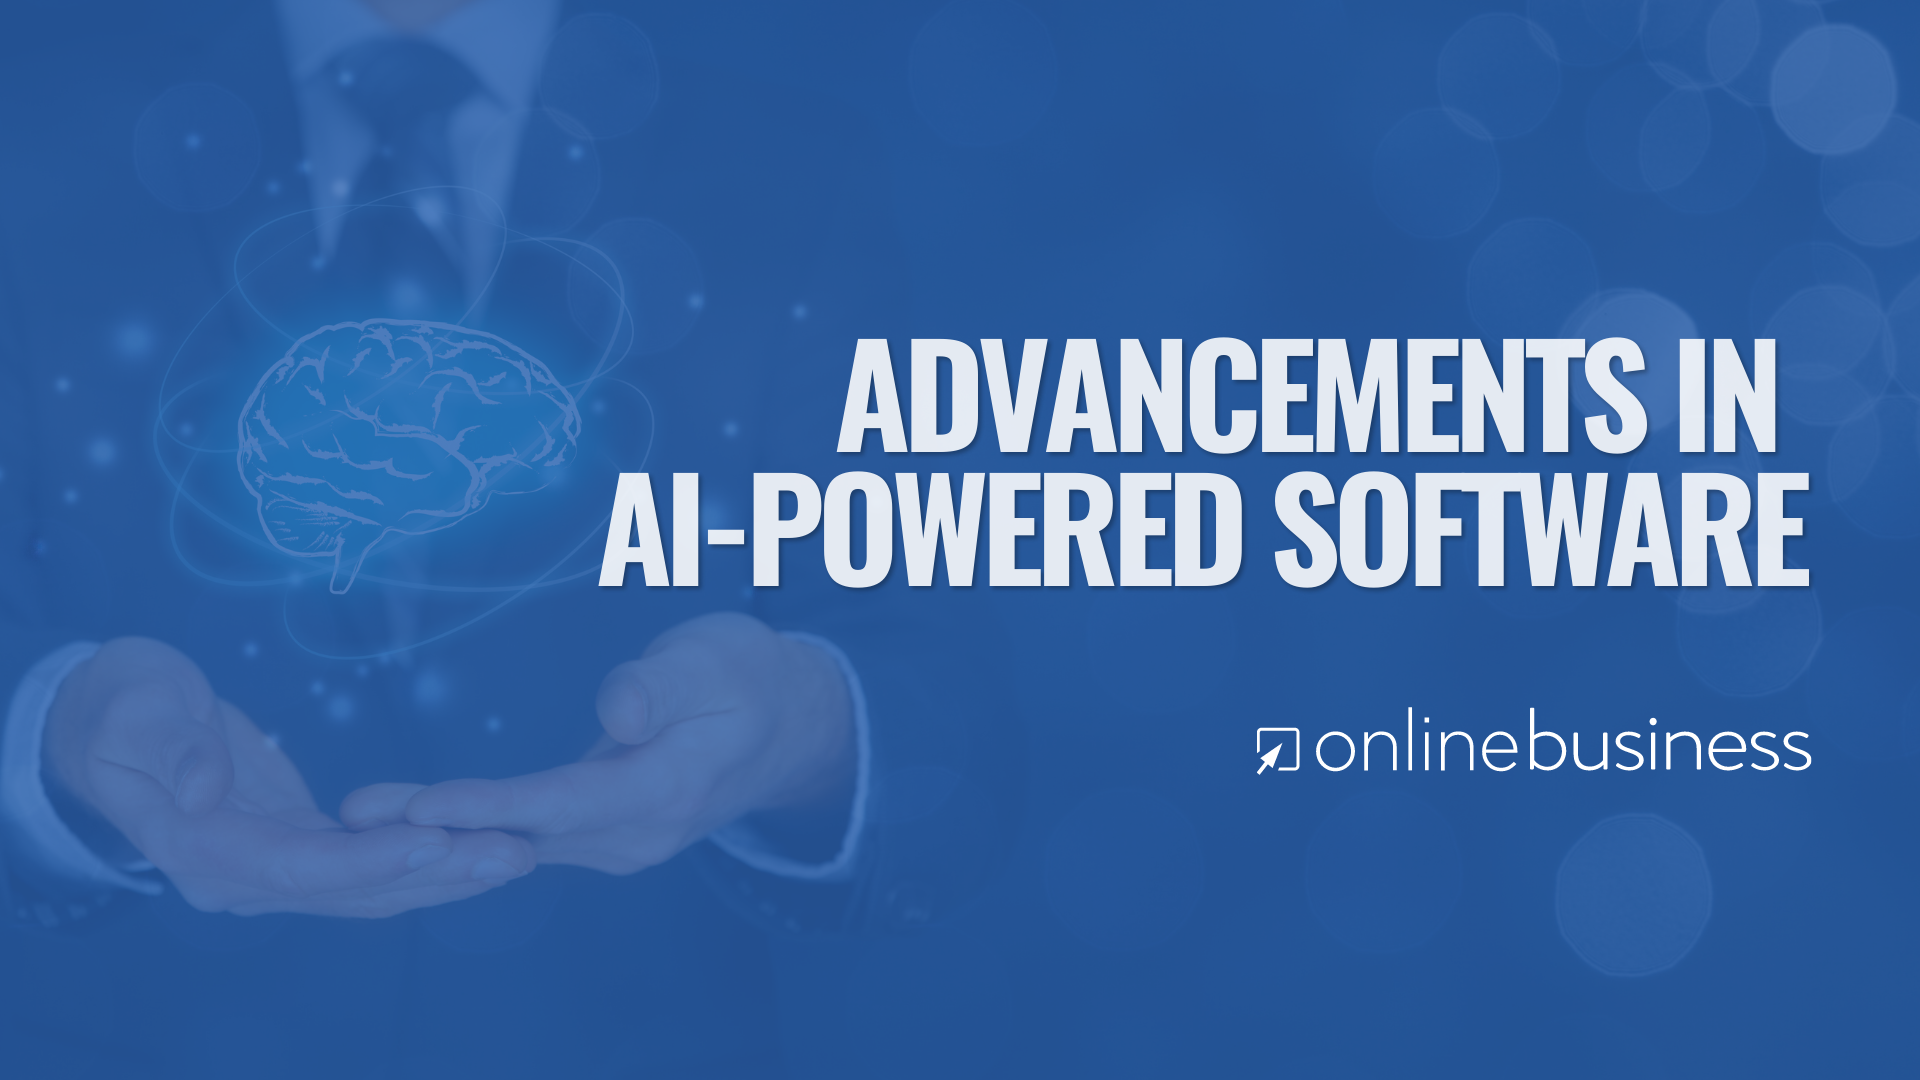 OnlineBusiness.com Discusses Advancements in AI-Powered Software